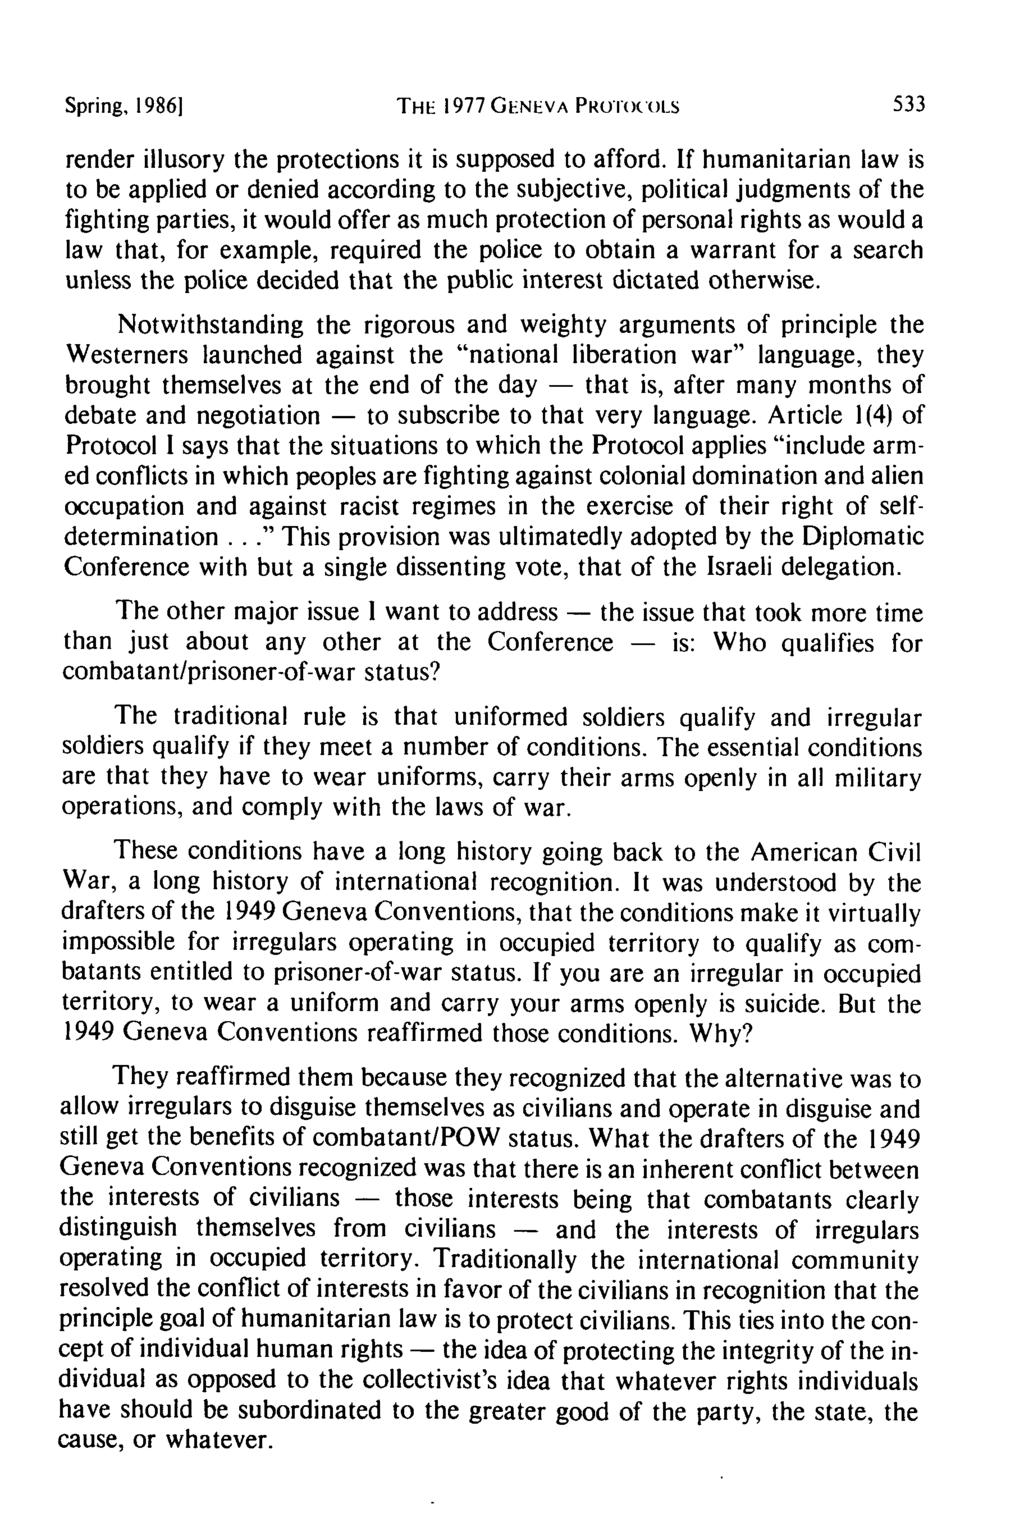 Spring, 1986] THE 1977 GENEVA PROTOCOLS render illusory the protections it is supposed to afford.